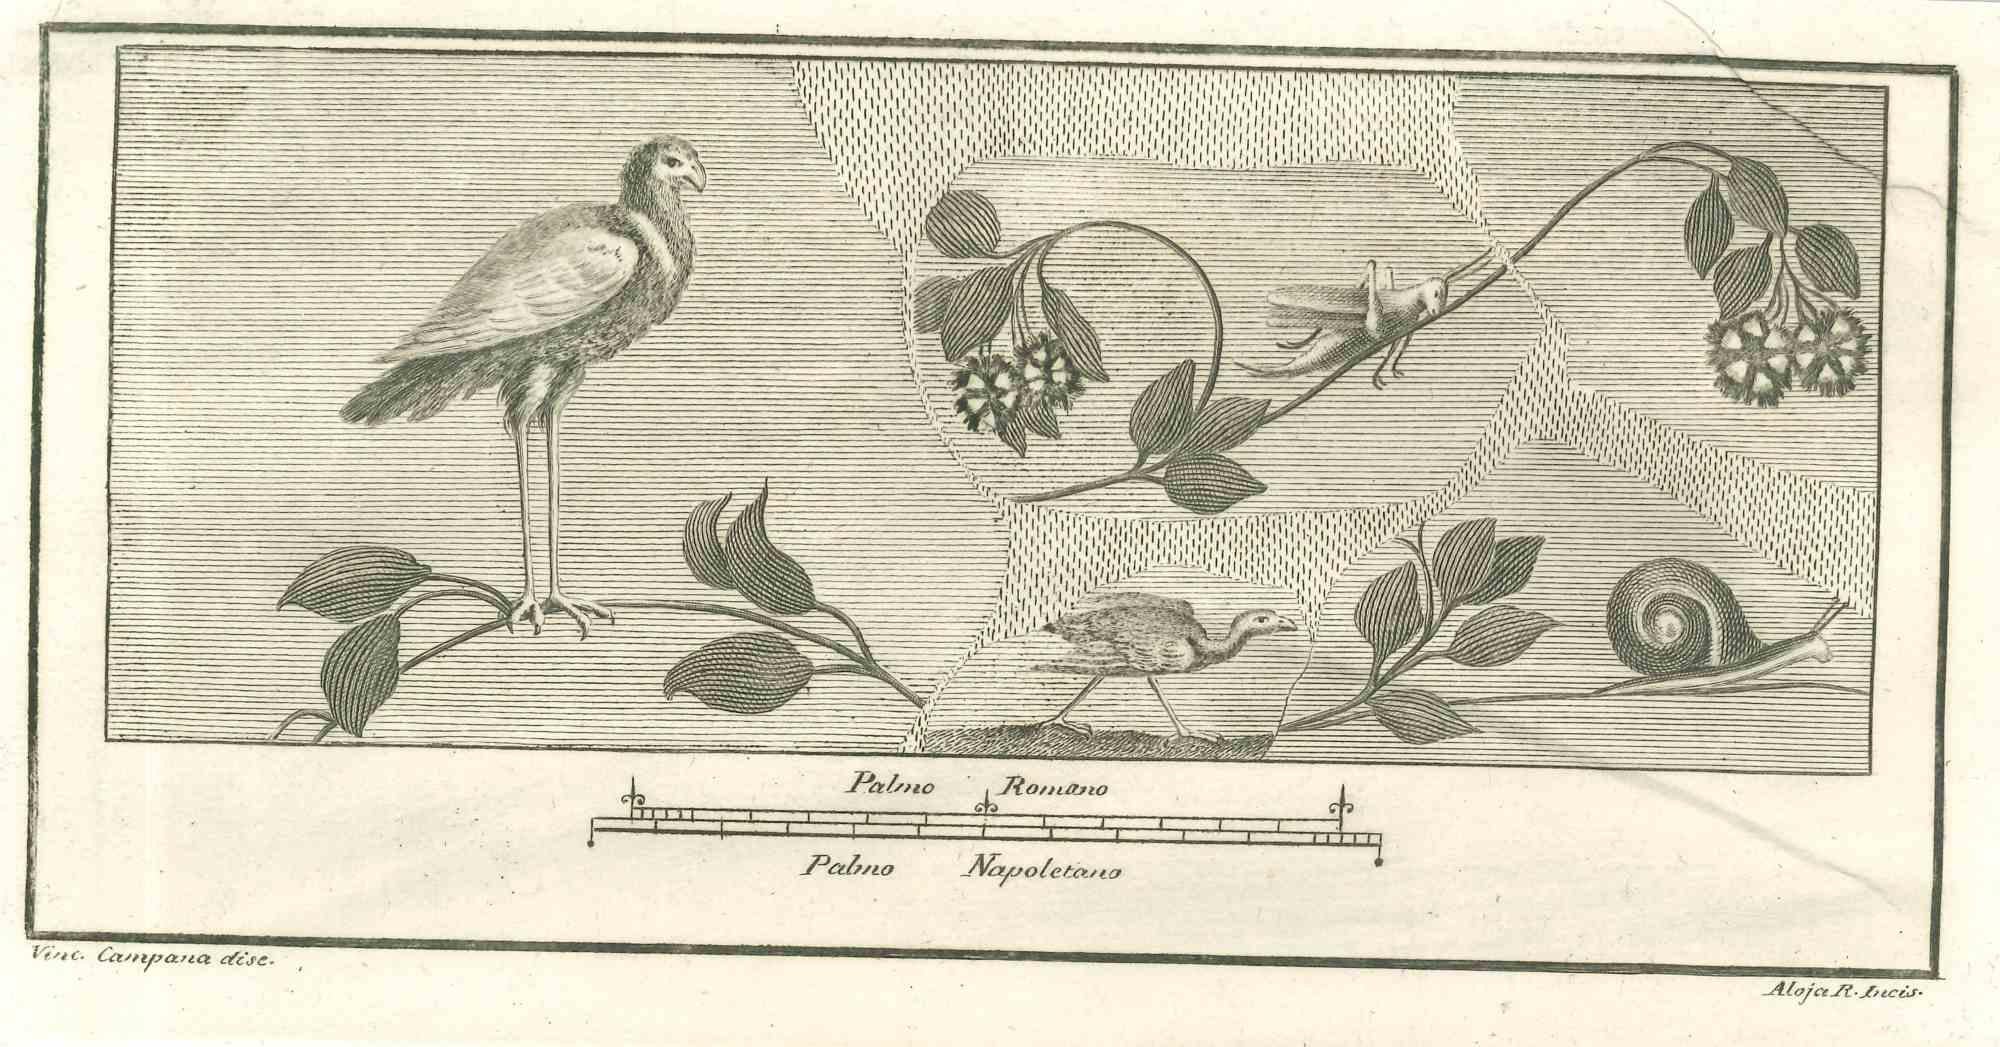 Birds Pompeian Fresco from "Antiquities of Herculaneum" is an etching on paper realized by Vincenzo Campana in the 18th Century.

Signed on the plate.

Good conditions with slight folding.

The etching belongs to the print suite “Antiquities of